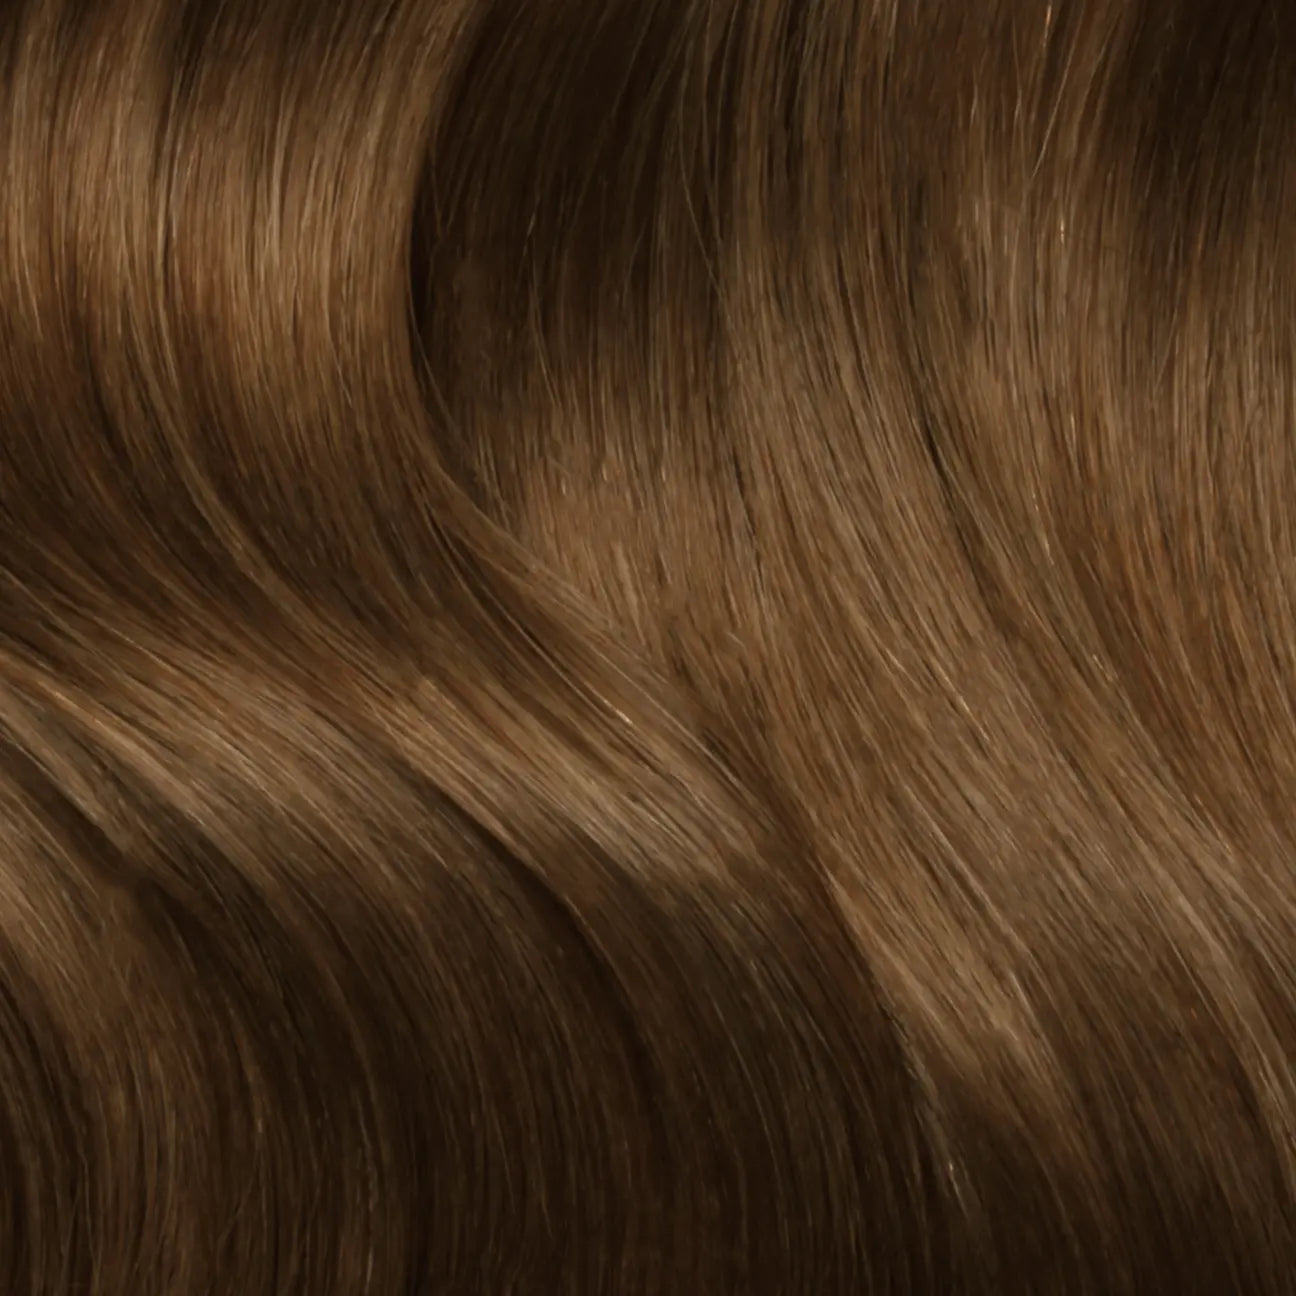 Flat Tip Bonds 22 Inches - SWAY Hair Extensions Chestnut-Brown-4 SWAY Flat Tip Bonds, 22&quot;- 100% Remy Human Hair Extensions with Italian Keratin. Perfect for hair goals.